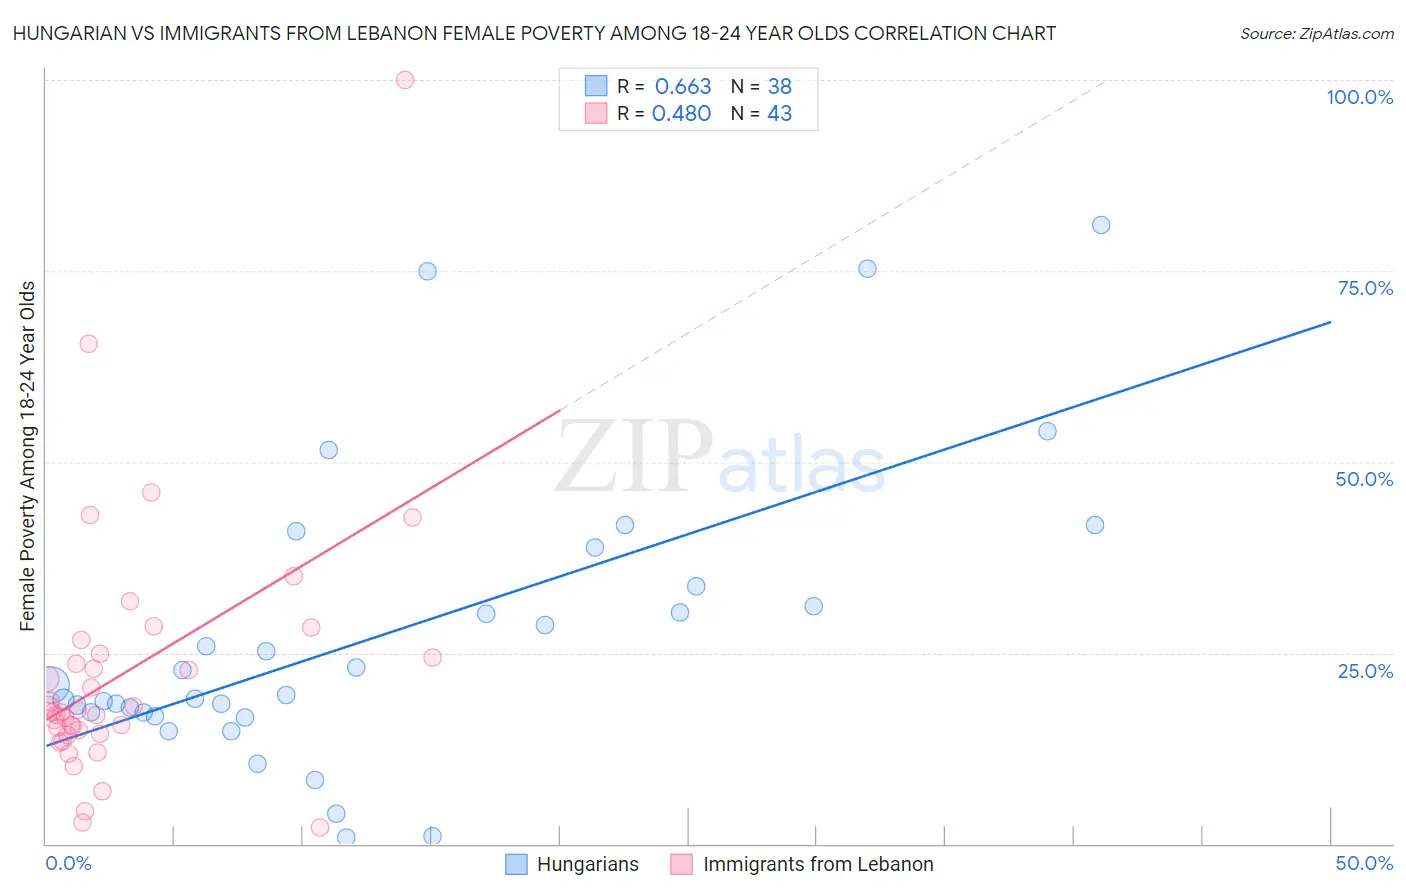 Hungarian vs Immigrants from Lebanon Female Poverty Among 18-24 Year Olds